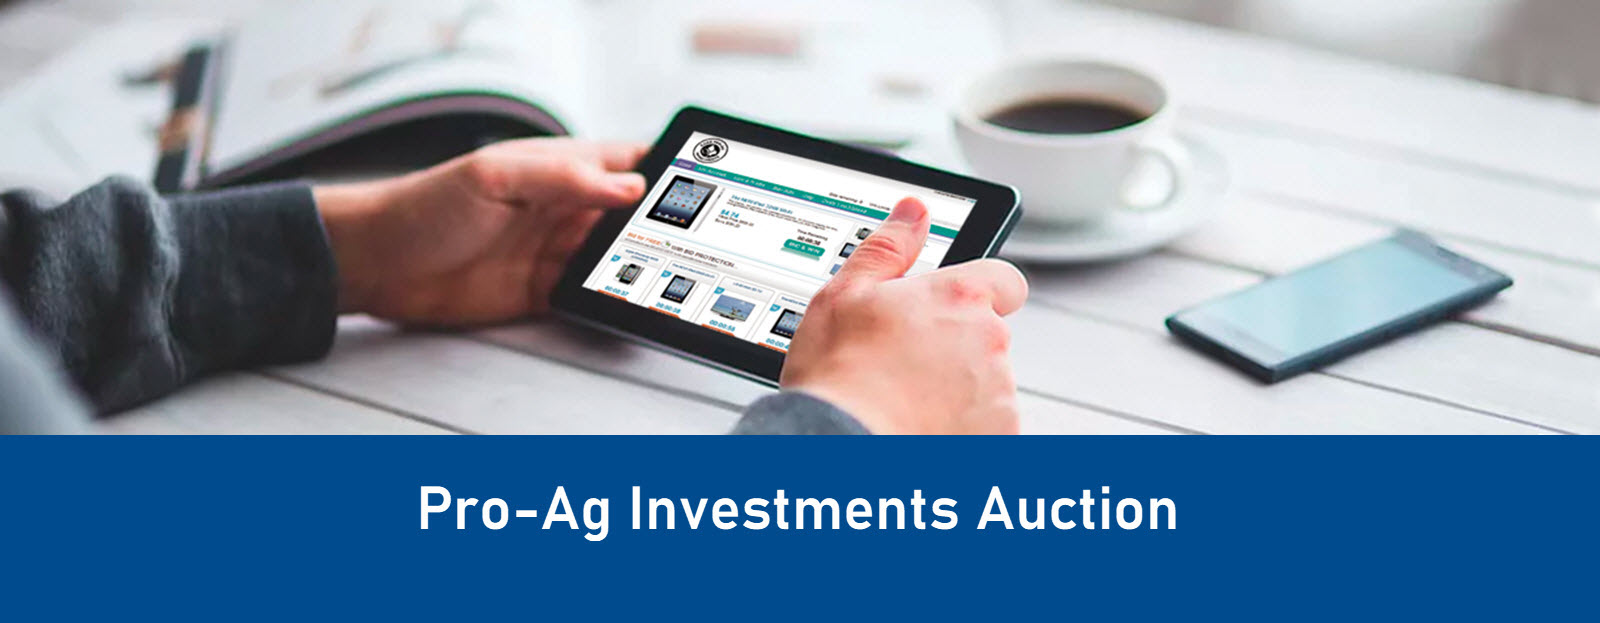 CAAR Pro-Ag Investments Auction Fundraising Results